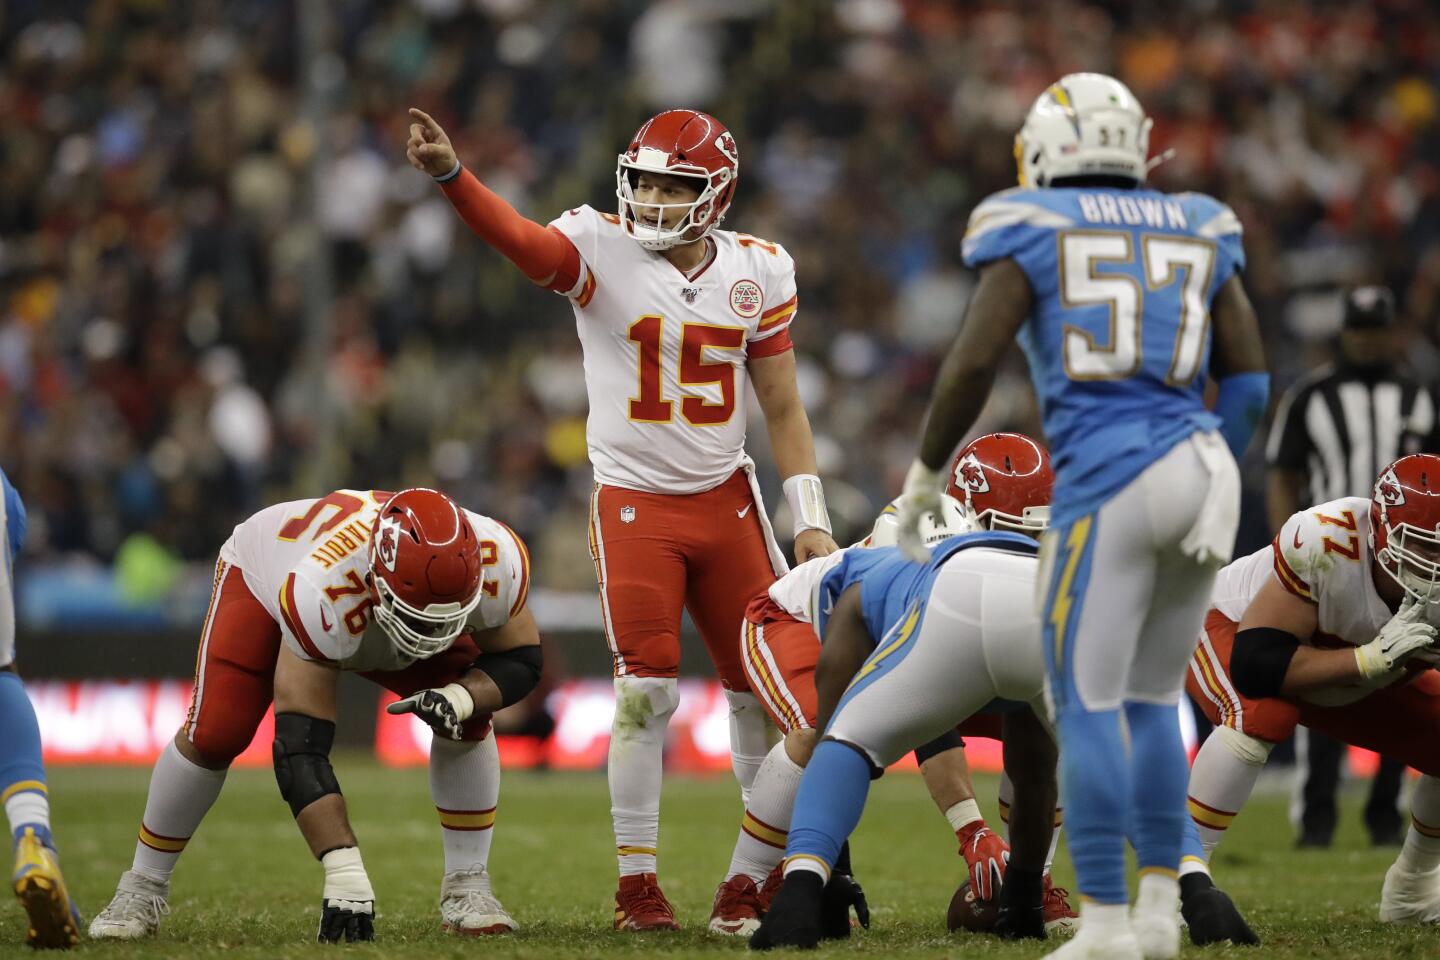 Chiefs quarterback Patrick Mahomes motions before a play during a game against the Chargers on Nov. 18.